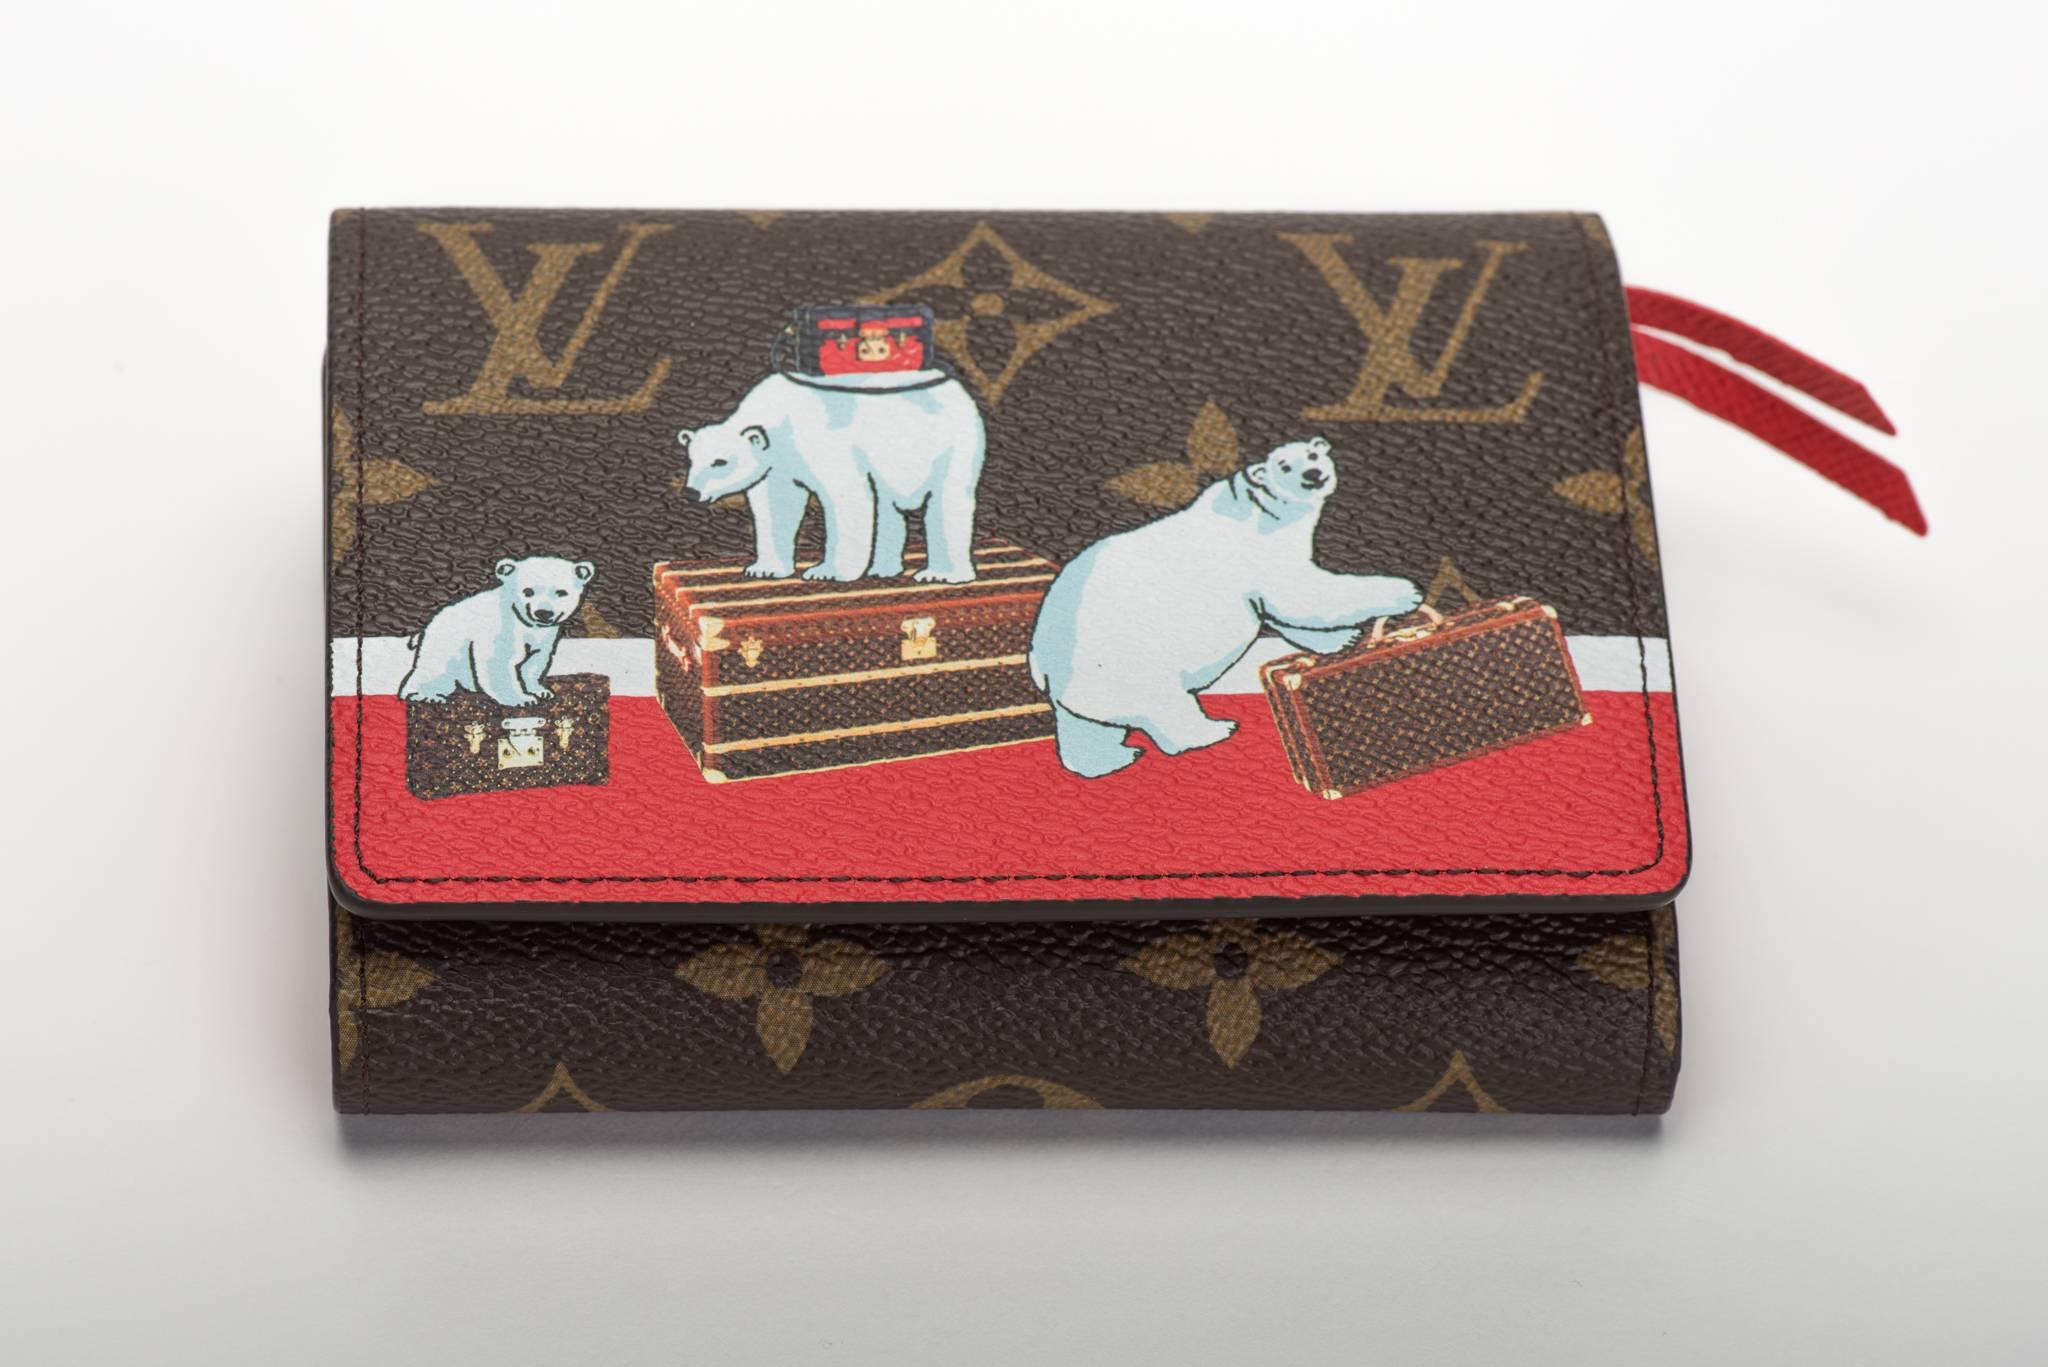 Louis Vuitton limited edition Christmas wallet with red leather interior and polar bears playing with trunks design. Brand new in box with dust cover and ribbon.